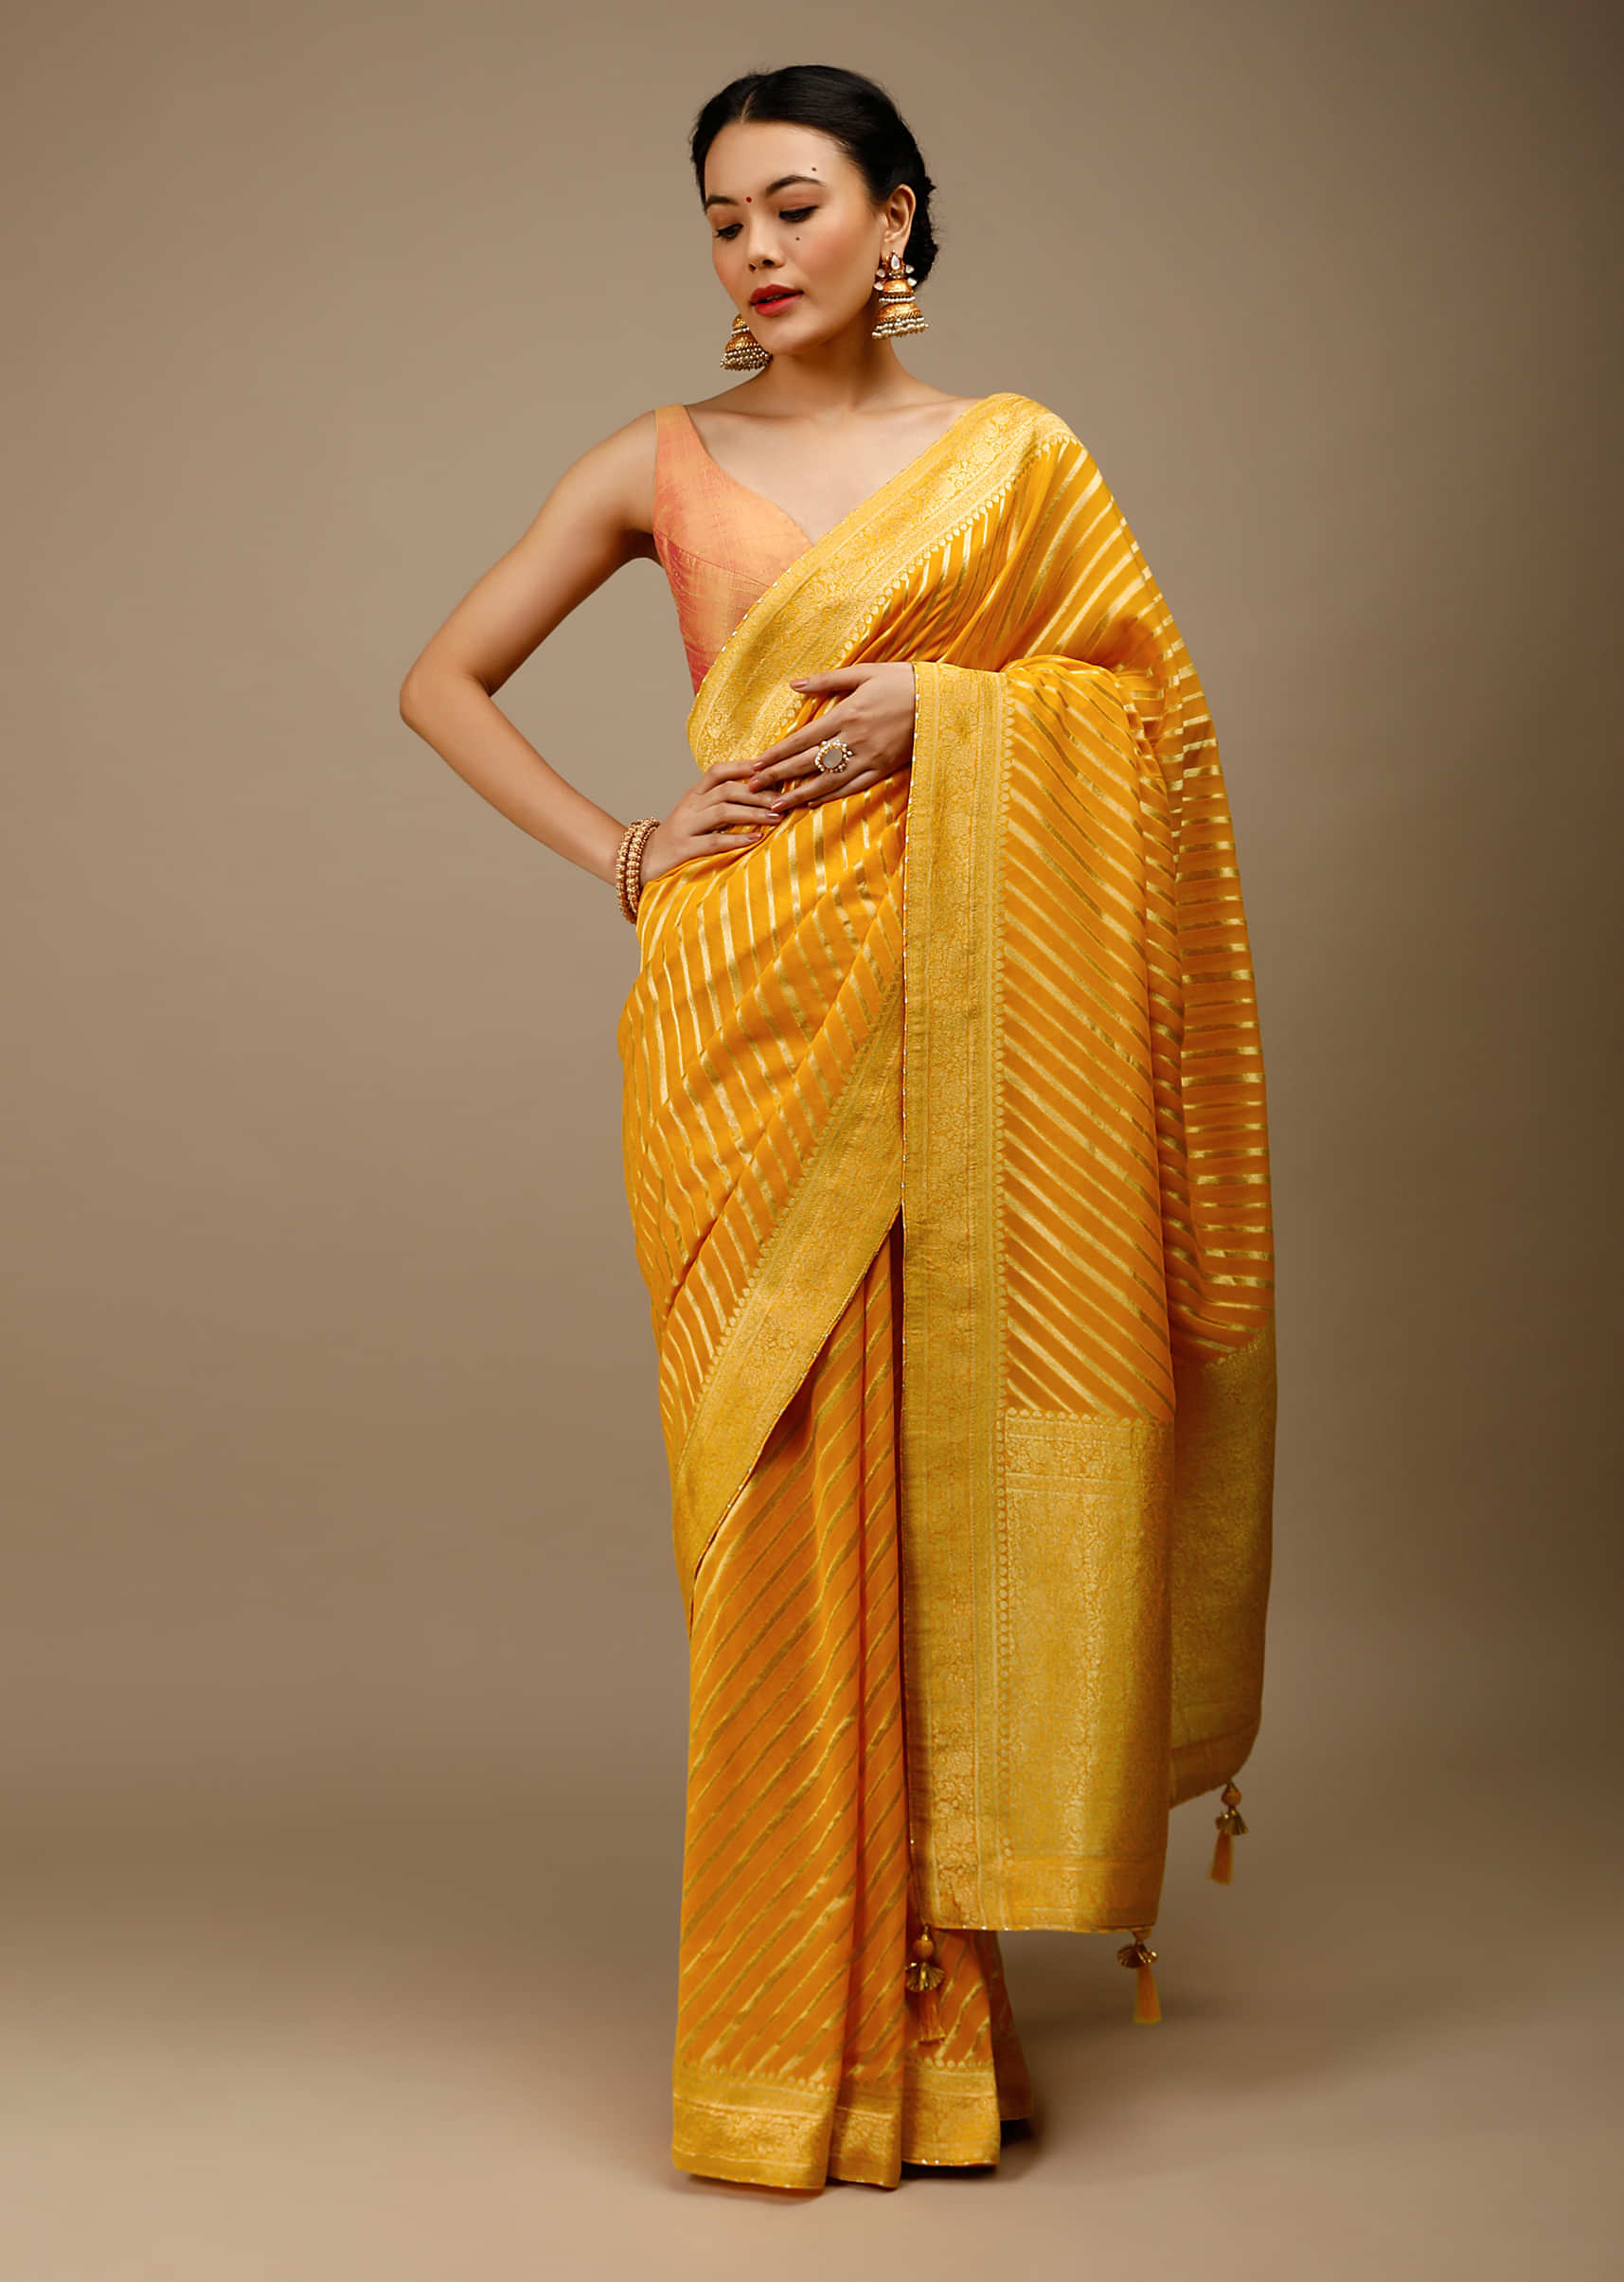 Radiant Yellow Saree In Georgette With Brocade Woven Diagonal Stripes And Floral Border  